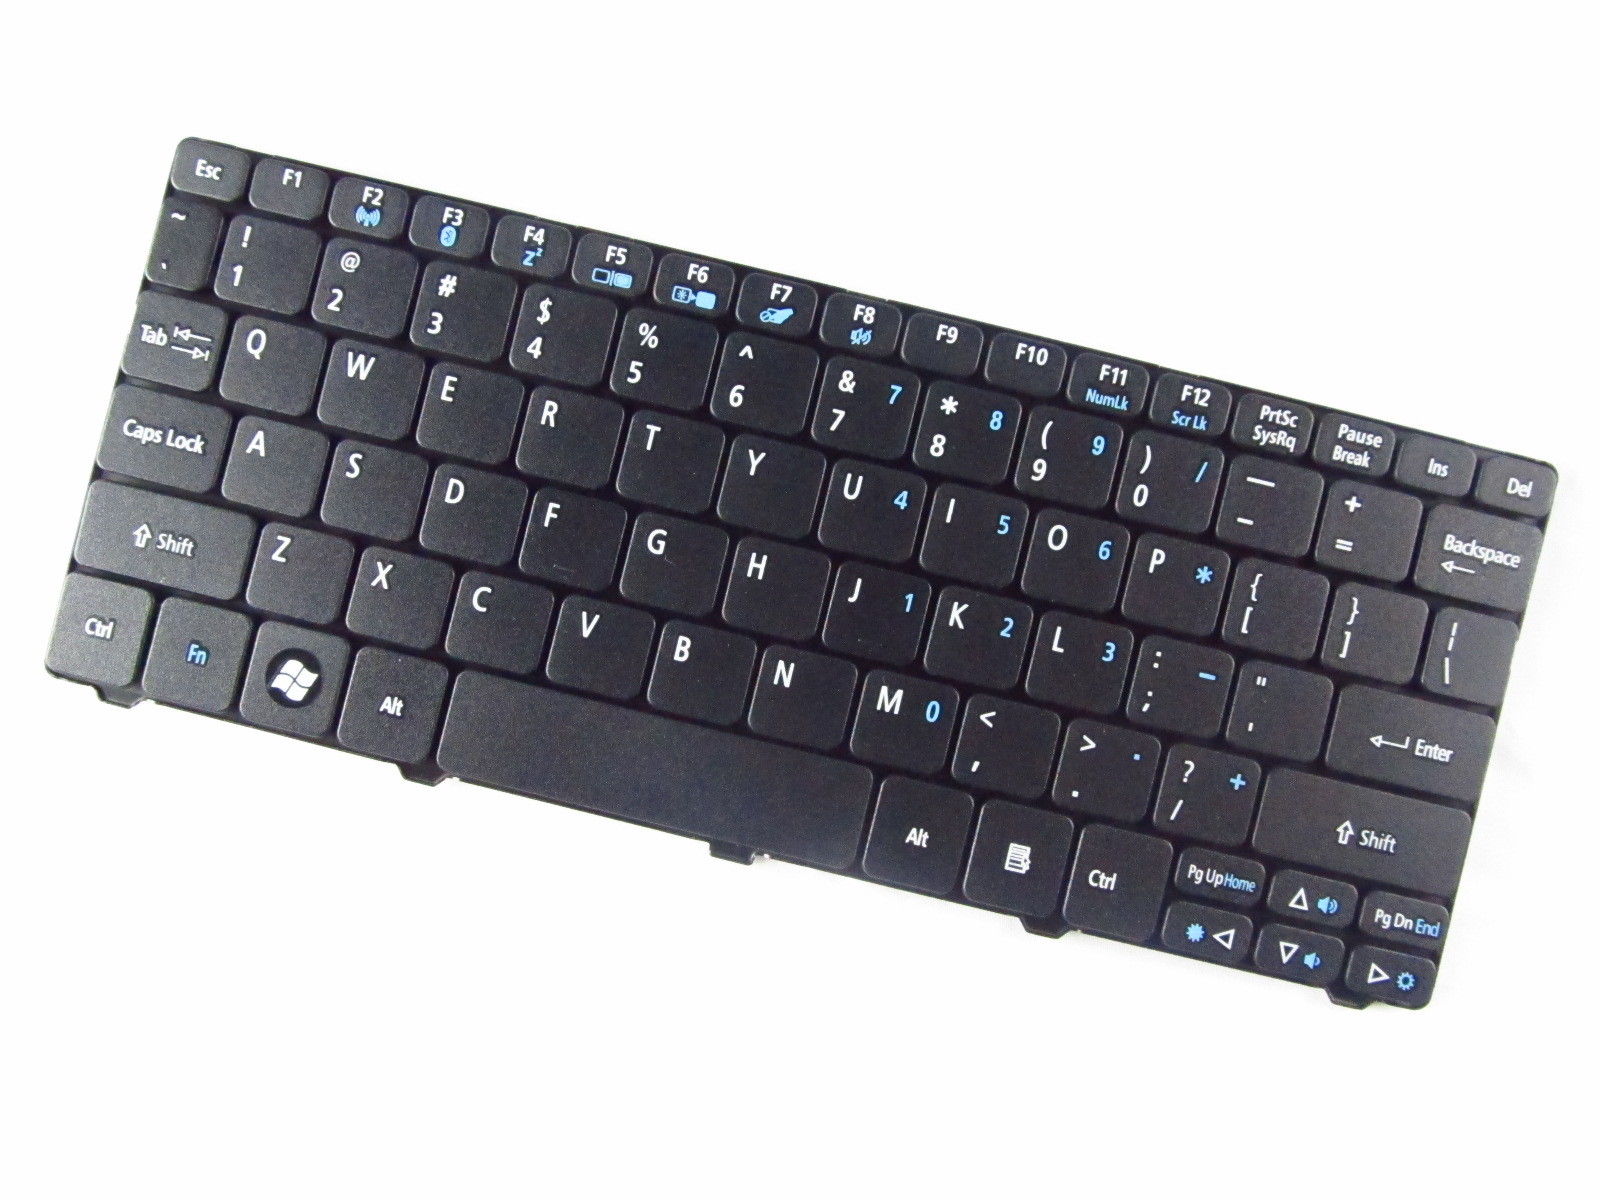 Hasee Laptop Keyboard Repair/replacement in chennai